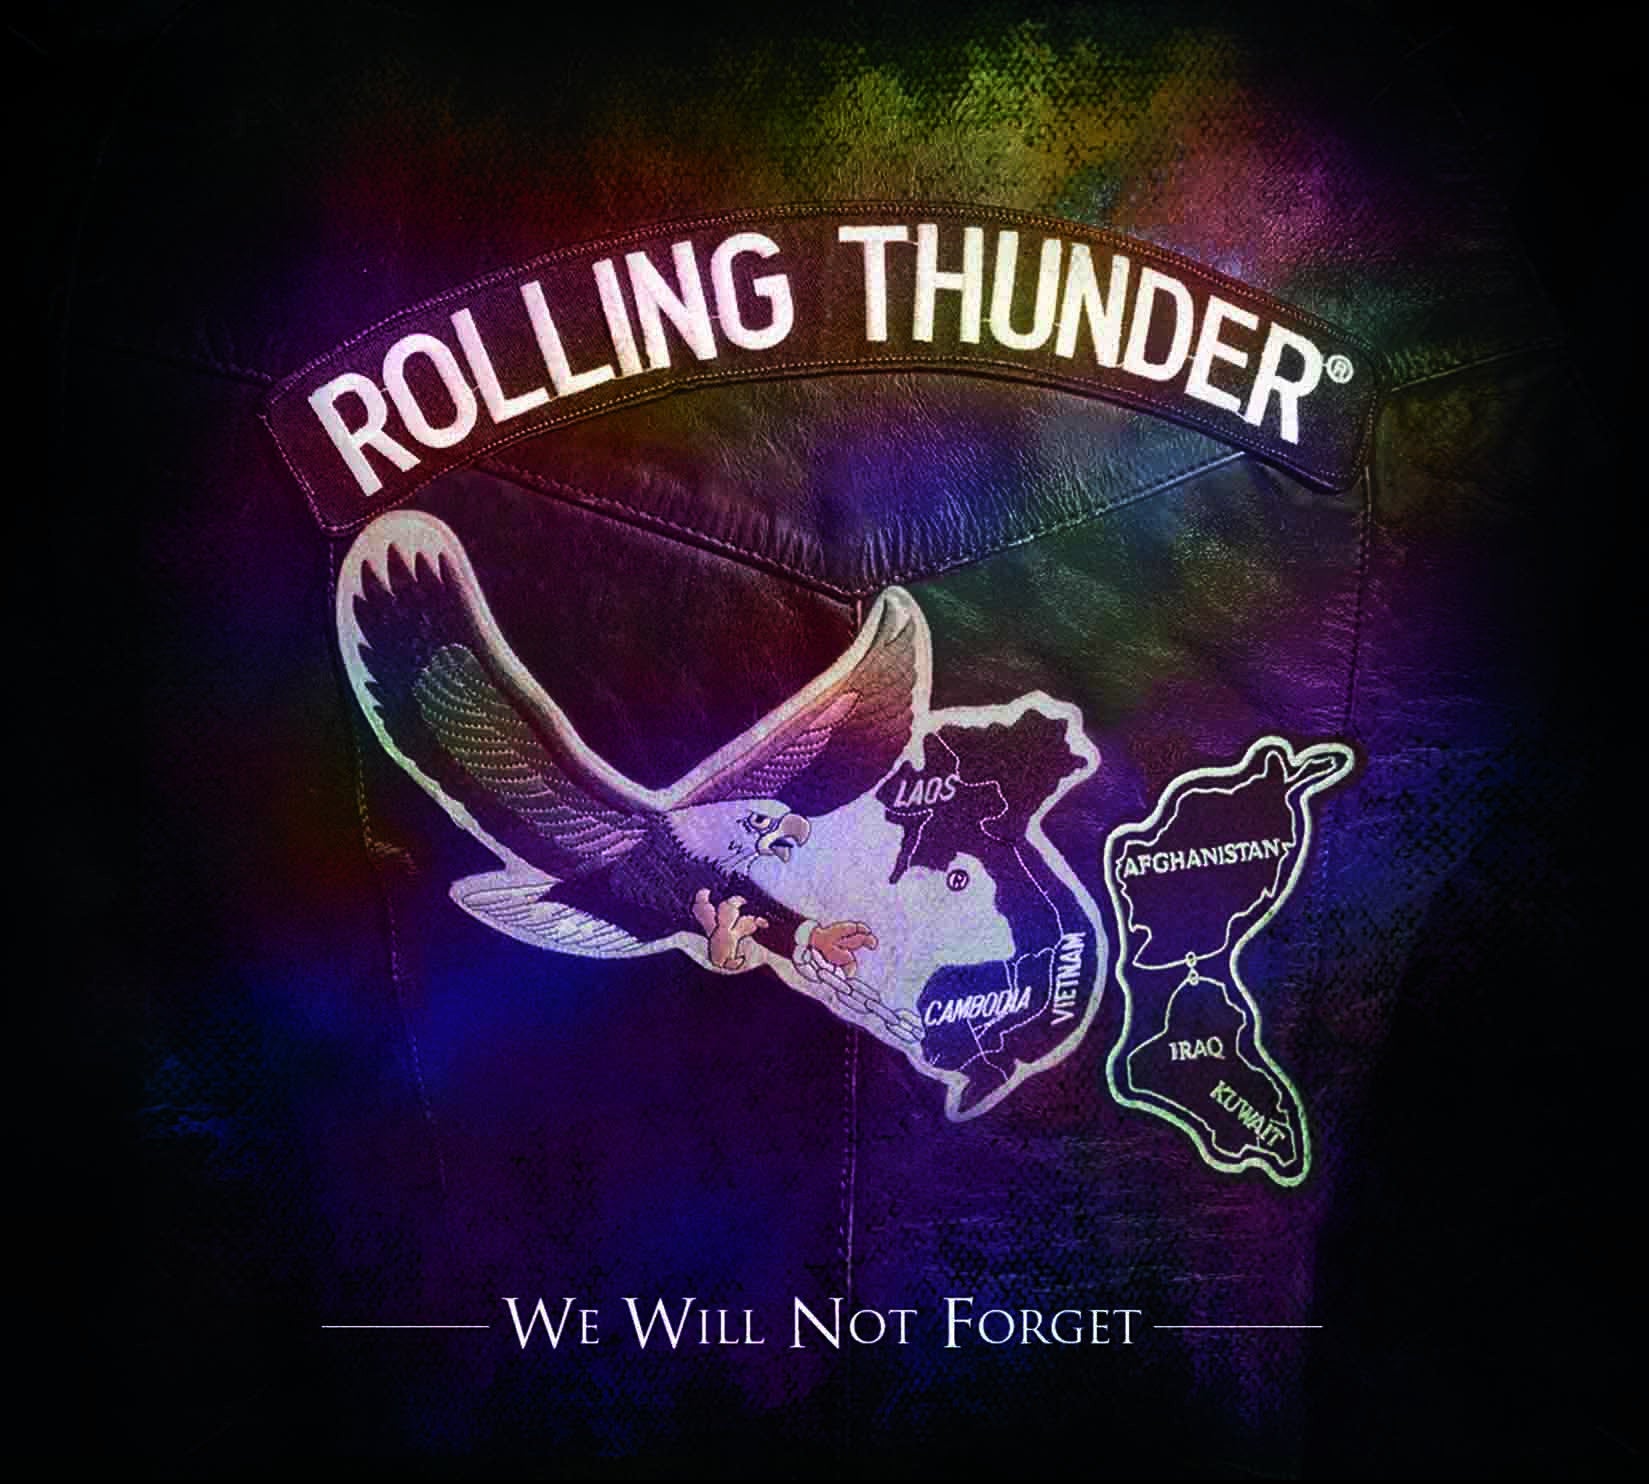 ROLLING THUNDER: WE WILL NOT FORGET